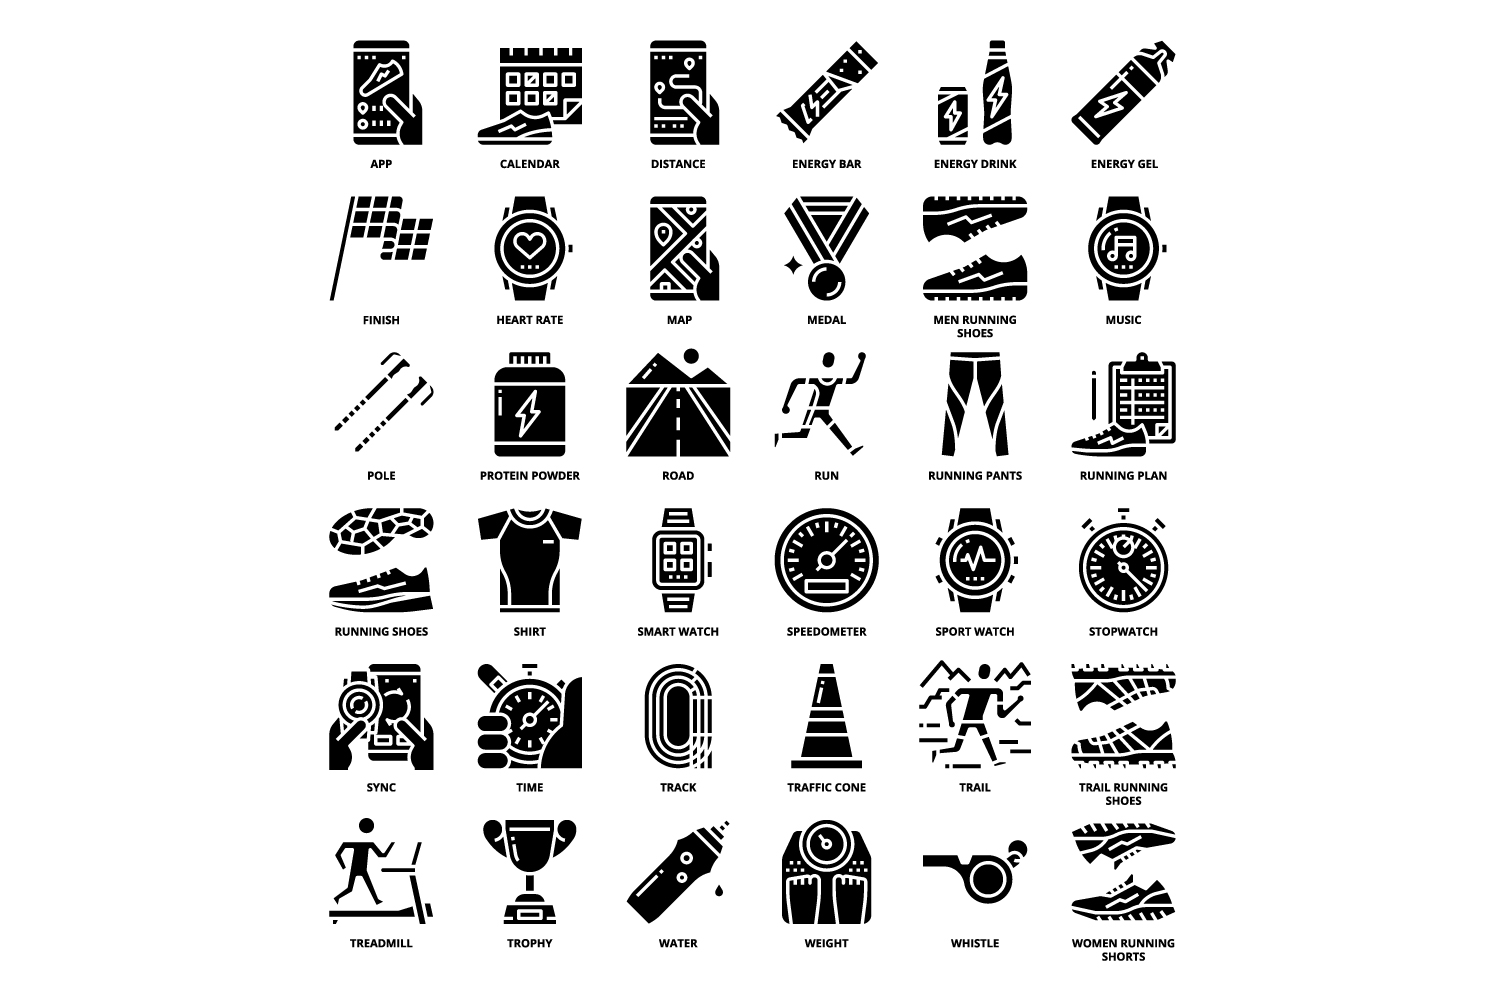 Black and white image of various sports related items.